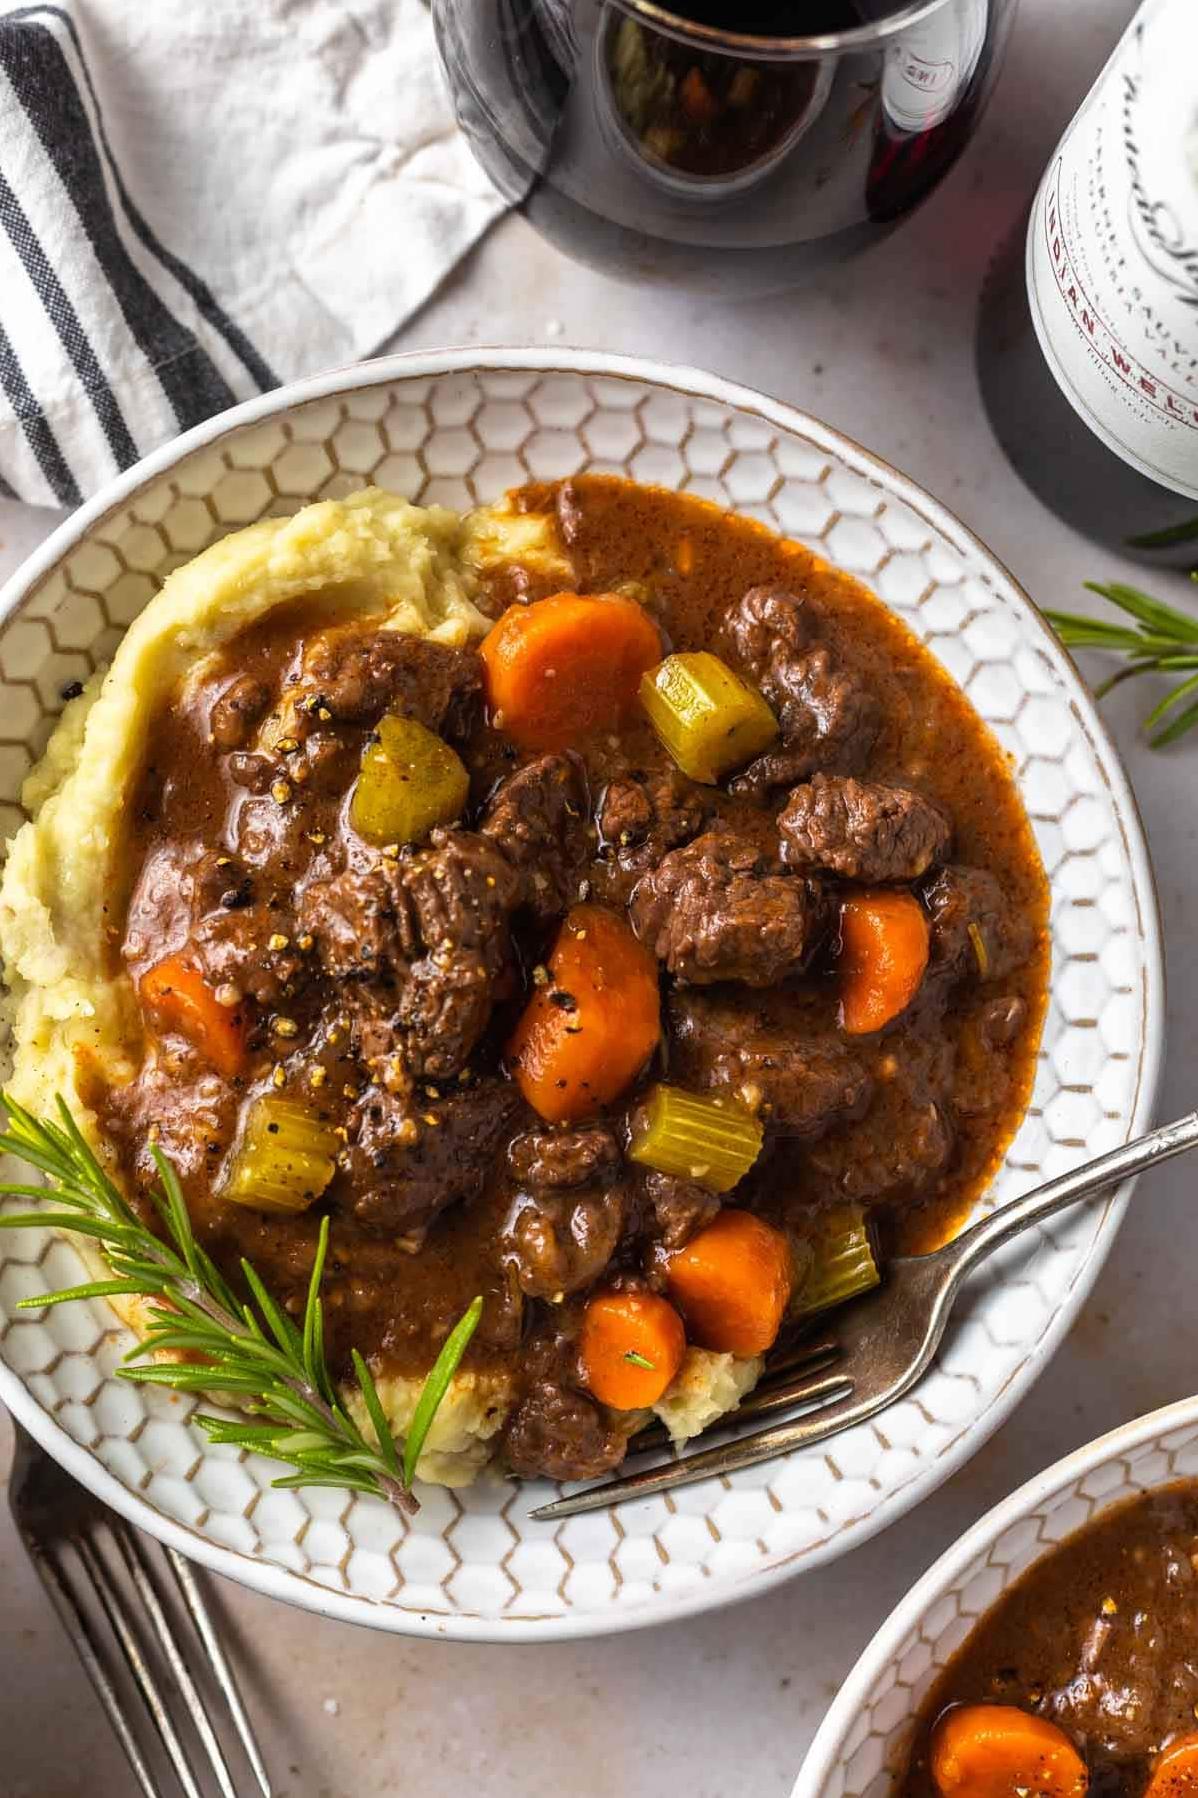  A hearty bowl of beef stew is the ultimate comfort food on a cold day.